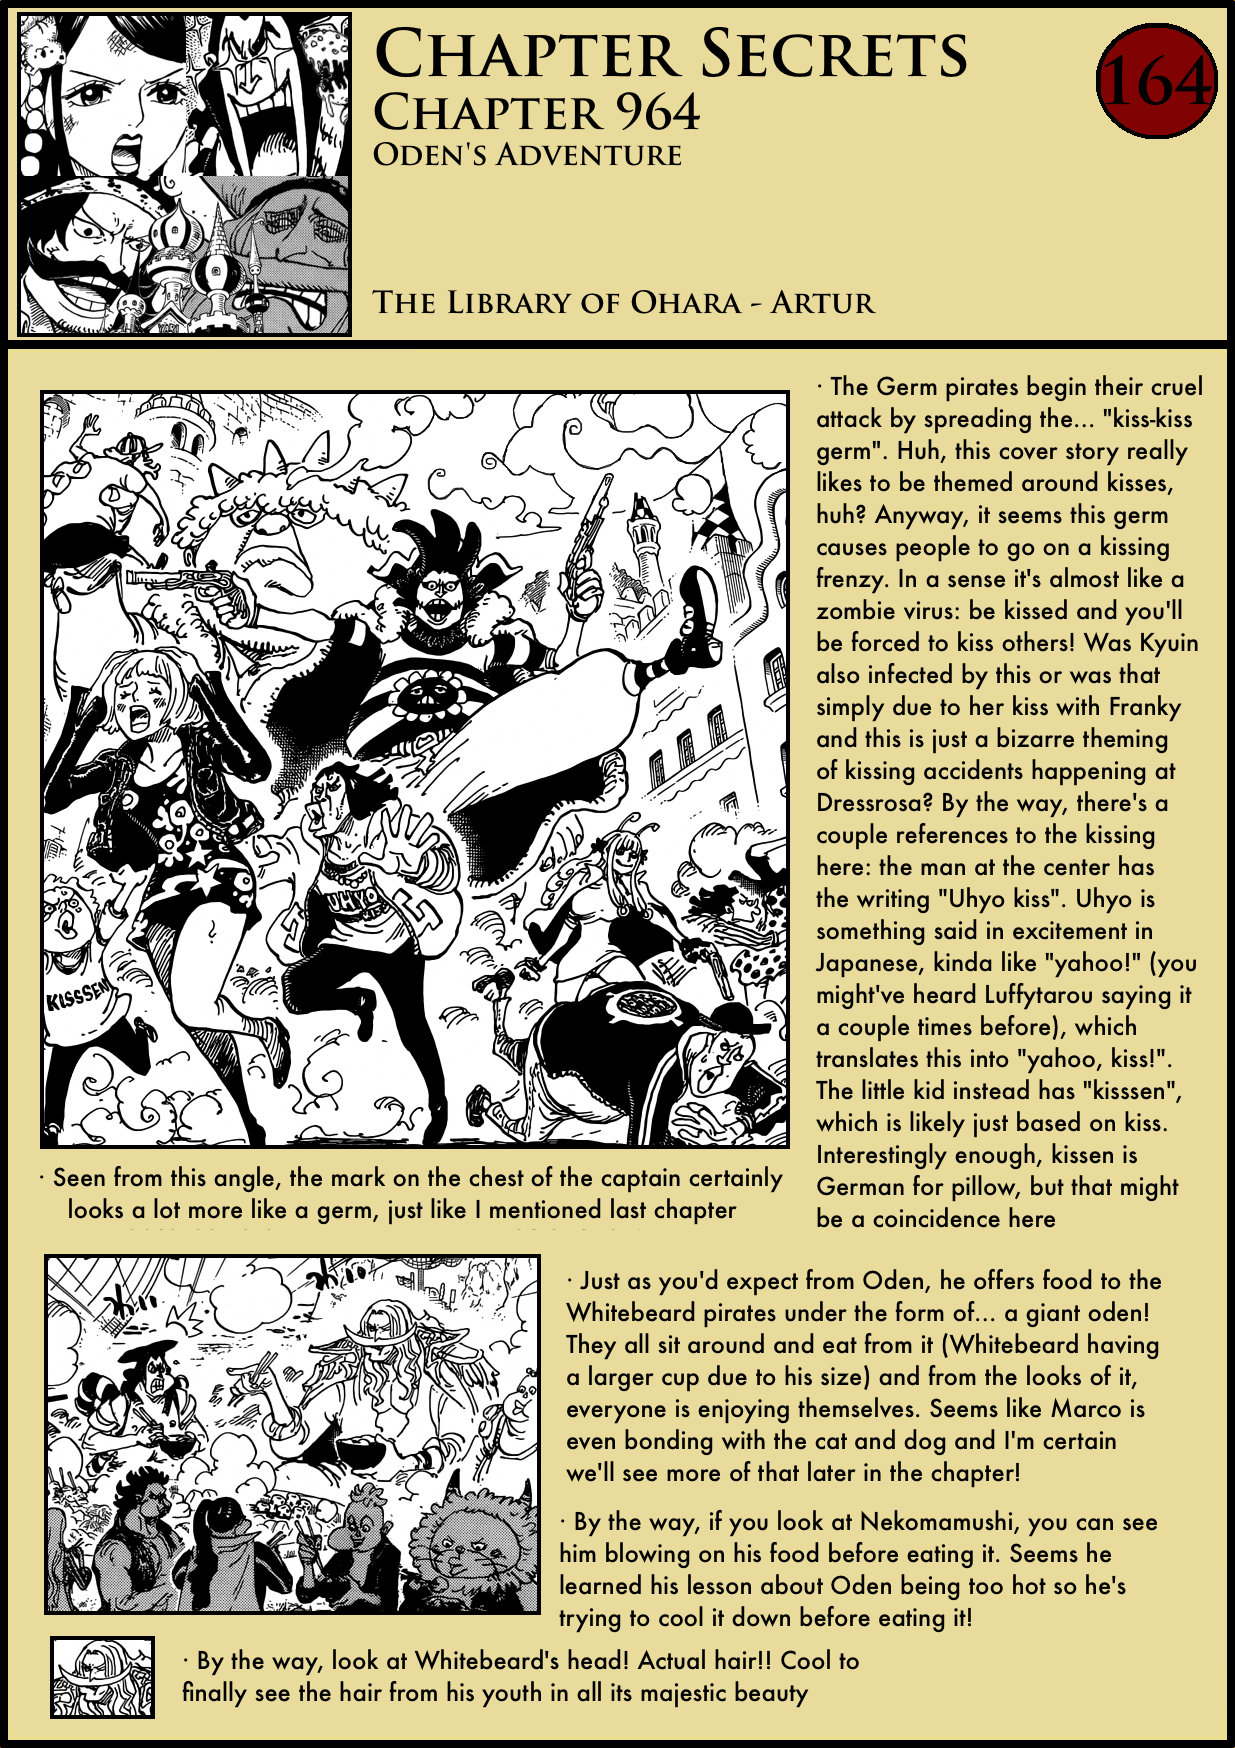 Chapter Secrets Chapter 964 In Depth Analysis The Library Of Ohara